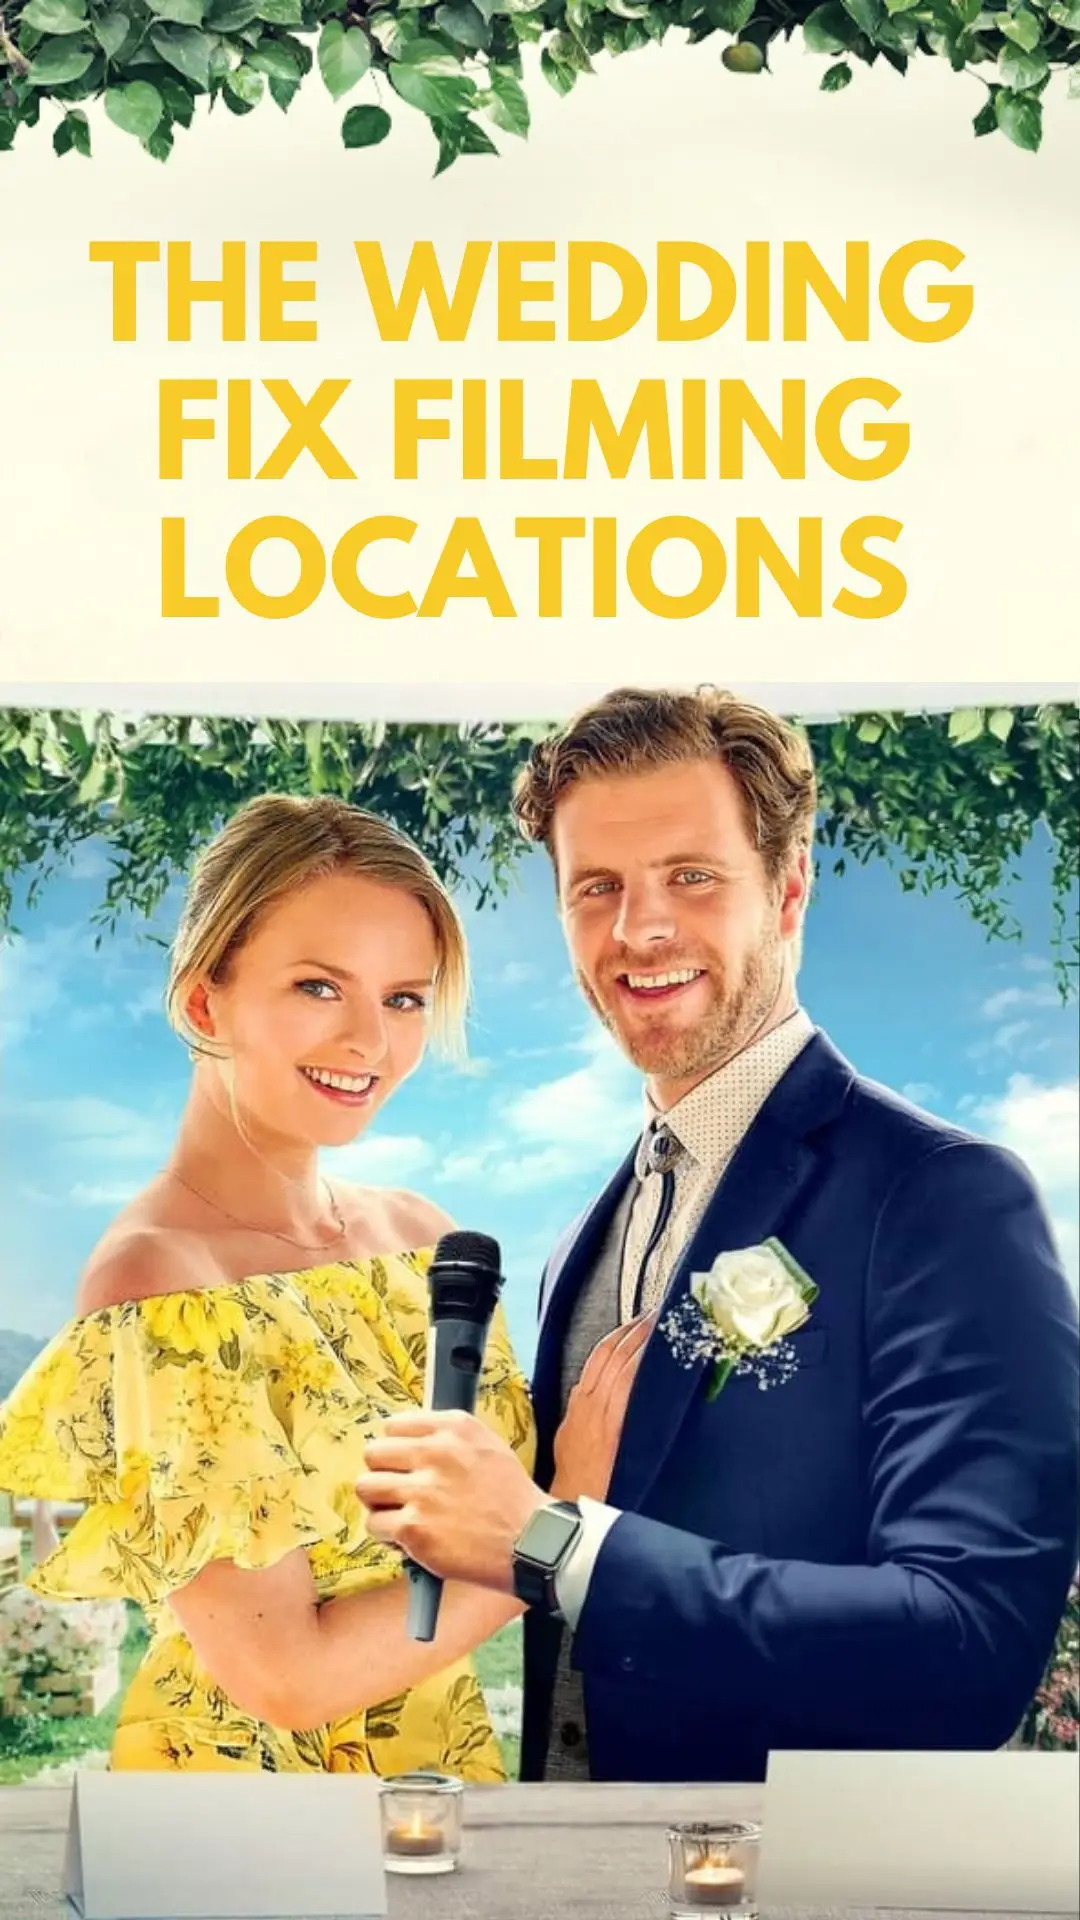 The Wedding Fix Filming Locations